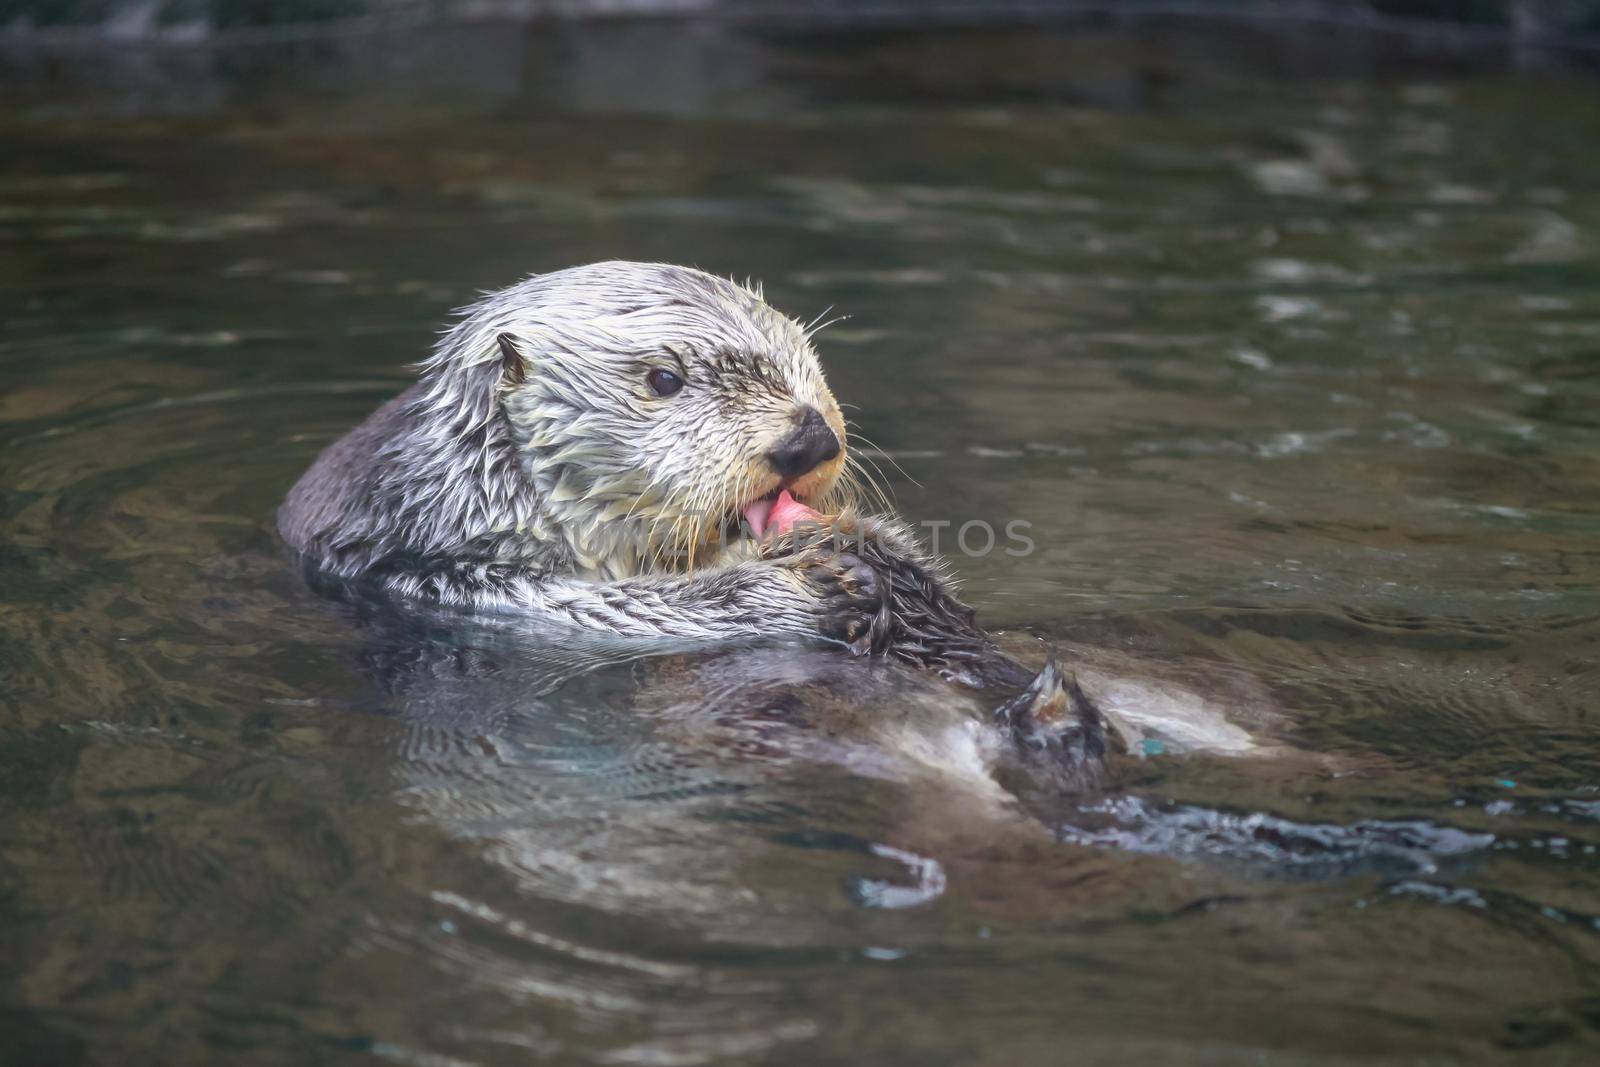 A sea otter enjoys leisure time in water.